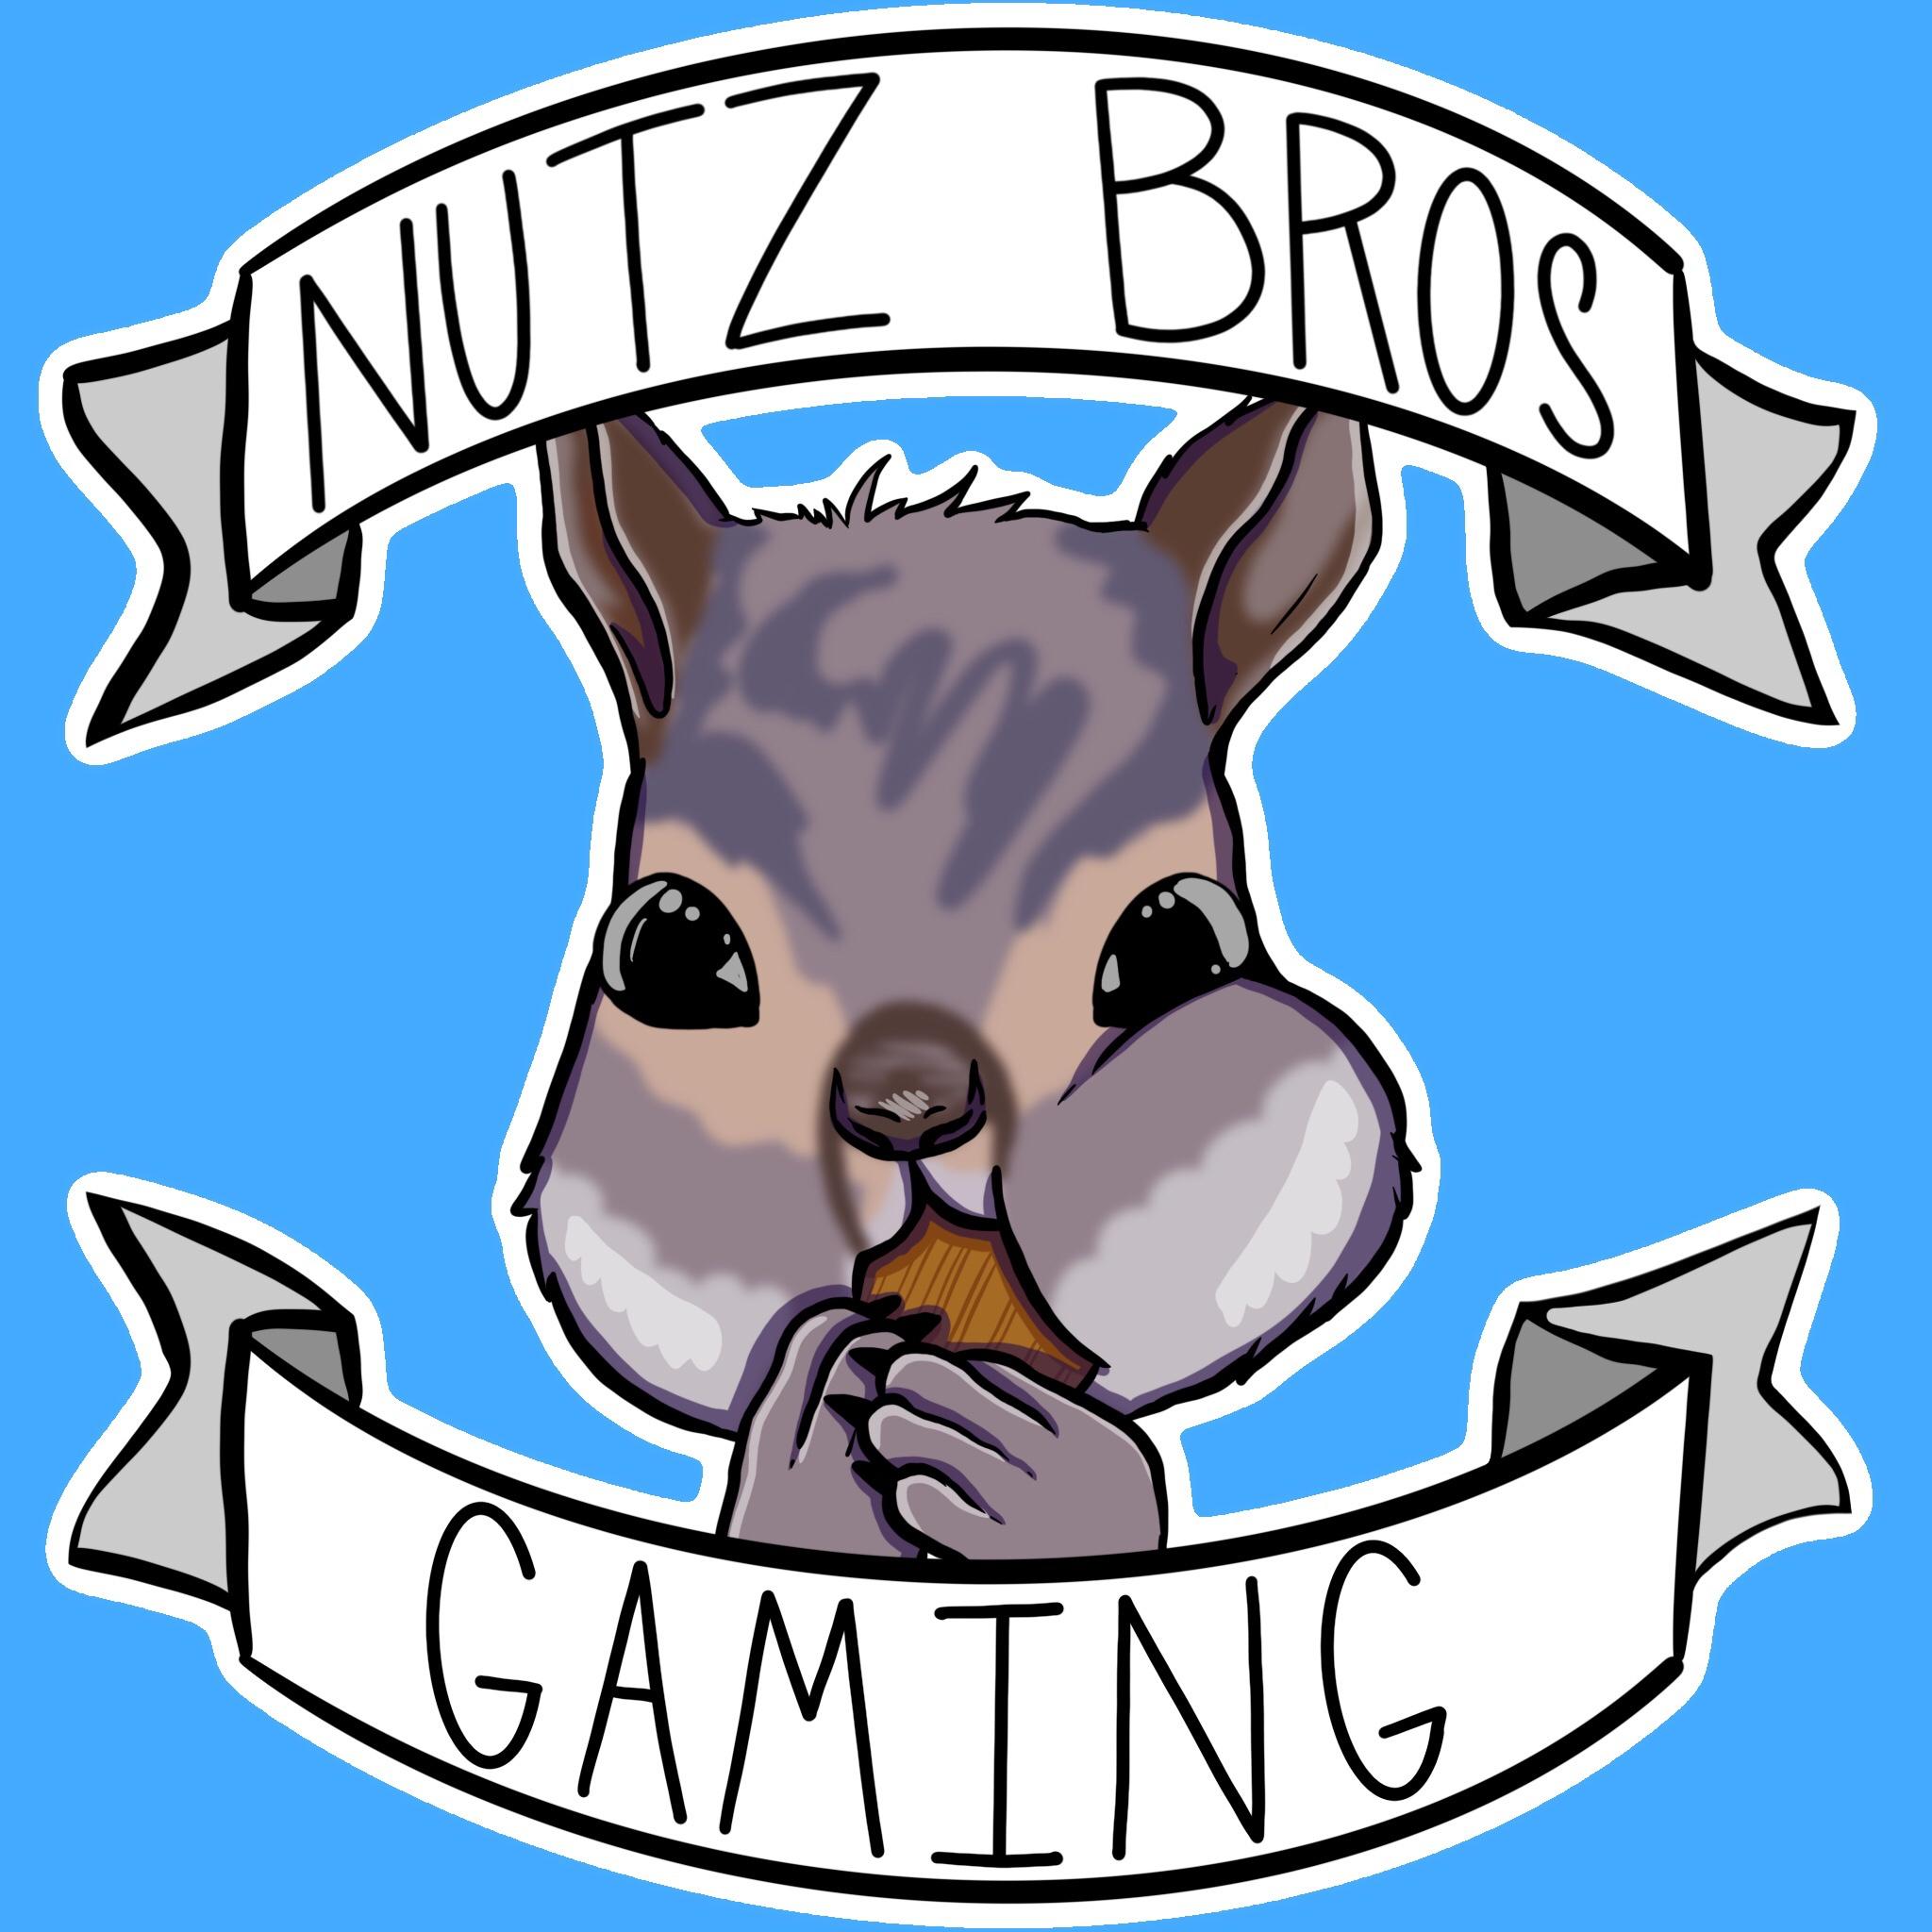 Nutz bros gaming ticket and png